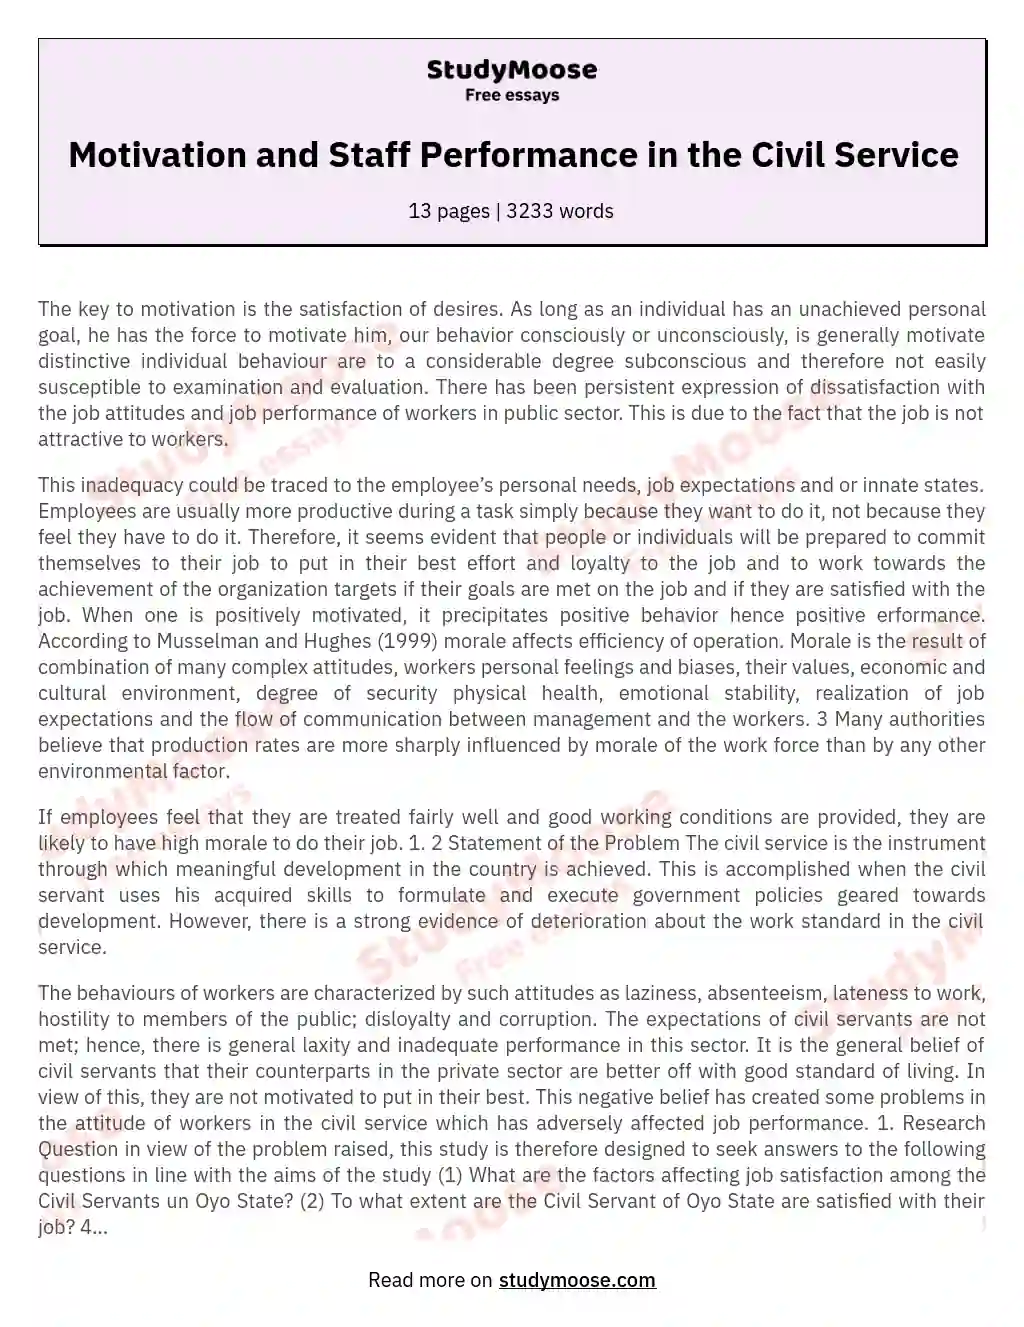 Motivation and Staff Performance in the Civil Service essay